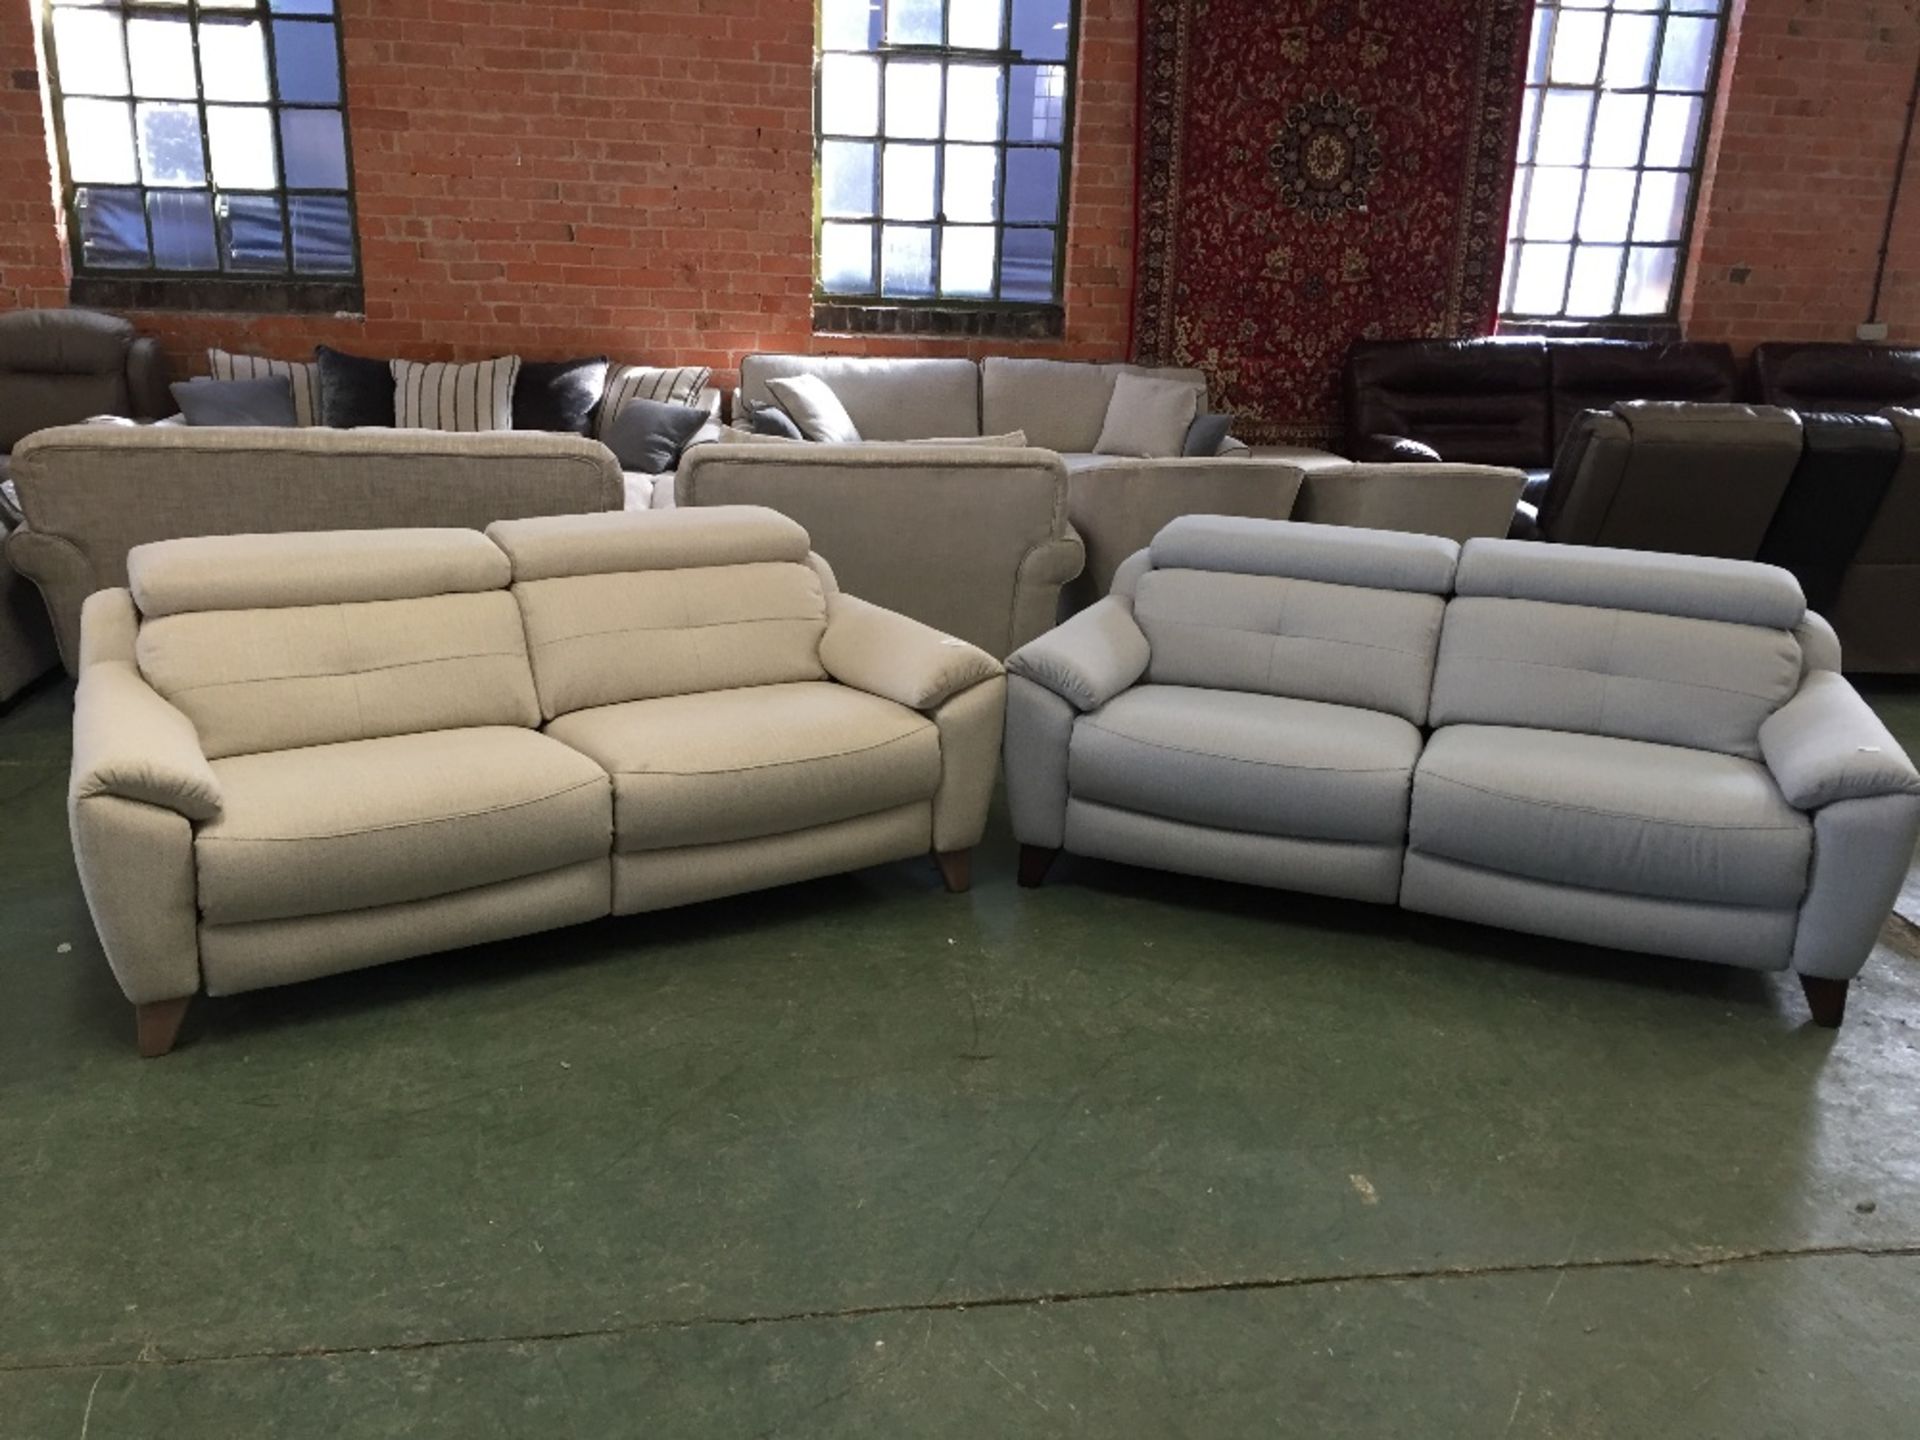 LIGHT BLUE ELECTRIC RECLINING 3 SEATER SOFA WITH A